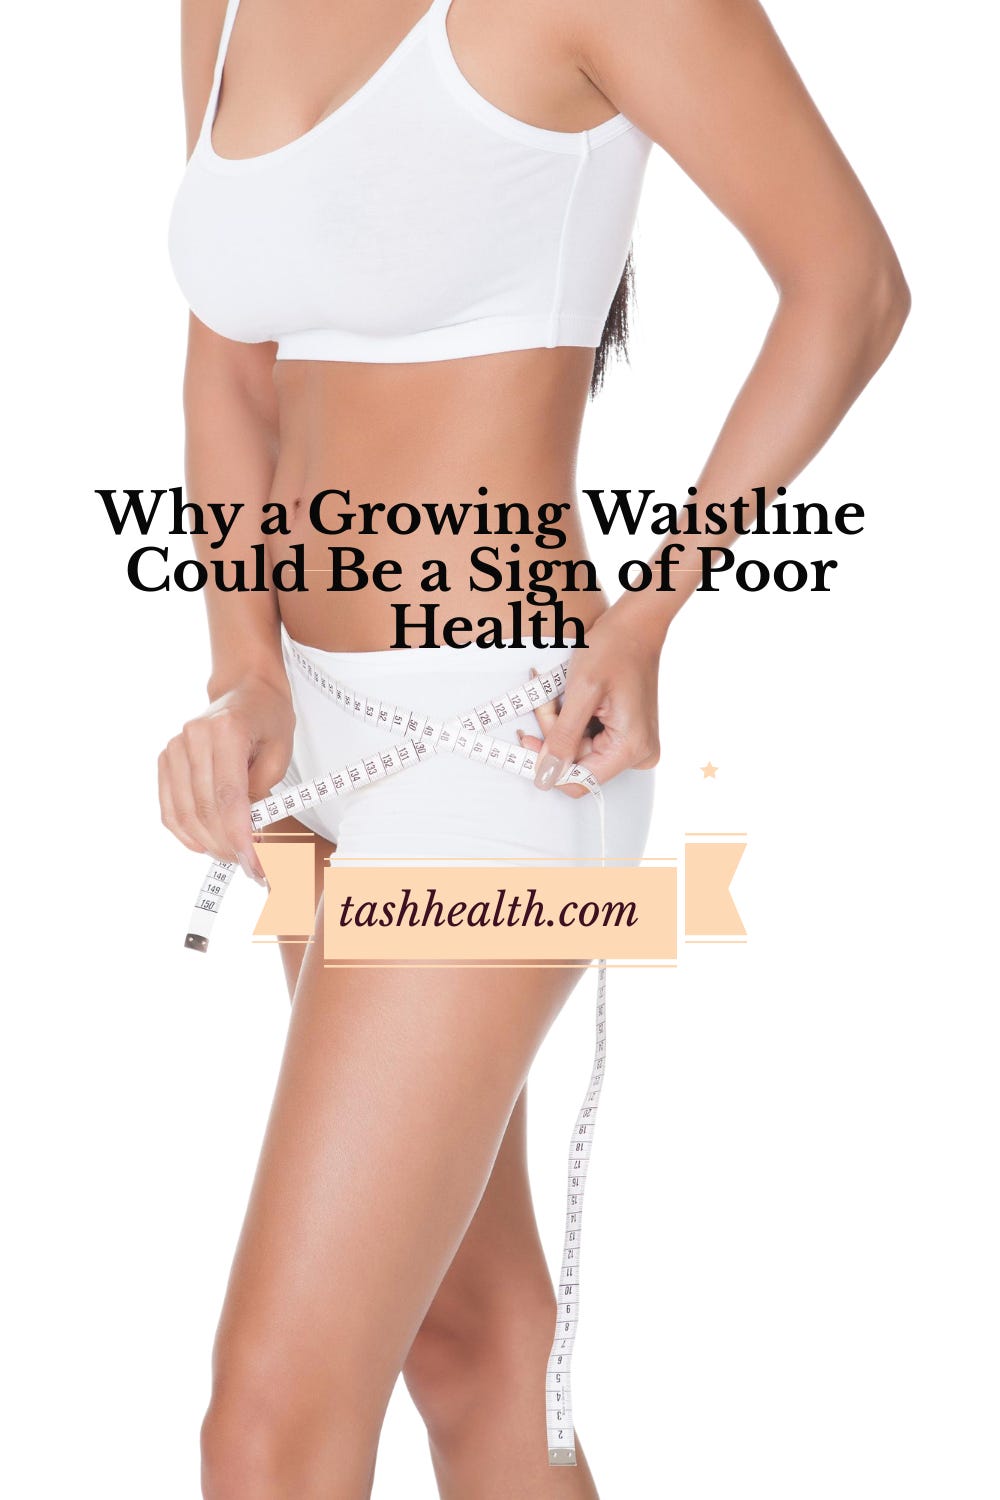 Why a Growing Waistline Could Be a Sign of Poor Health, by Tash Health